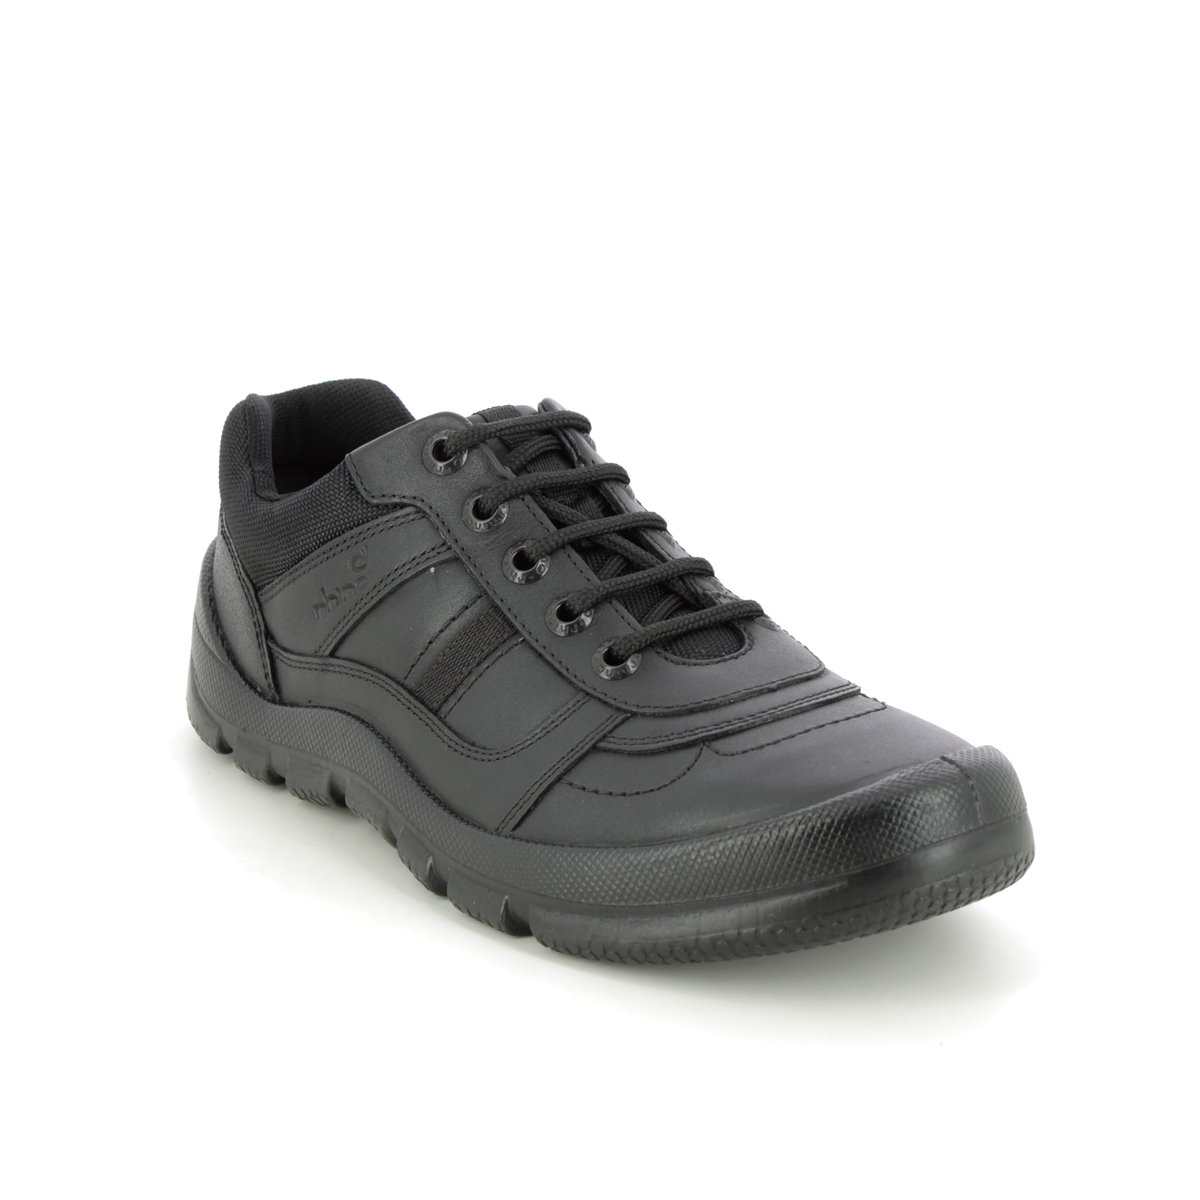 Start Rite - Rhino Warrior Lace In Black Leather 8238-76F In Size 4.5 In Plain Black Leather For School Boys Shoes  In Black Leather For kids